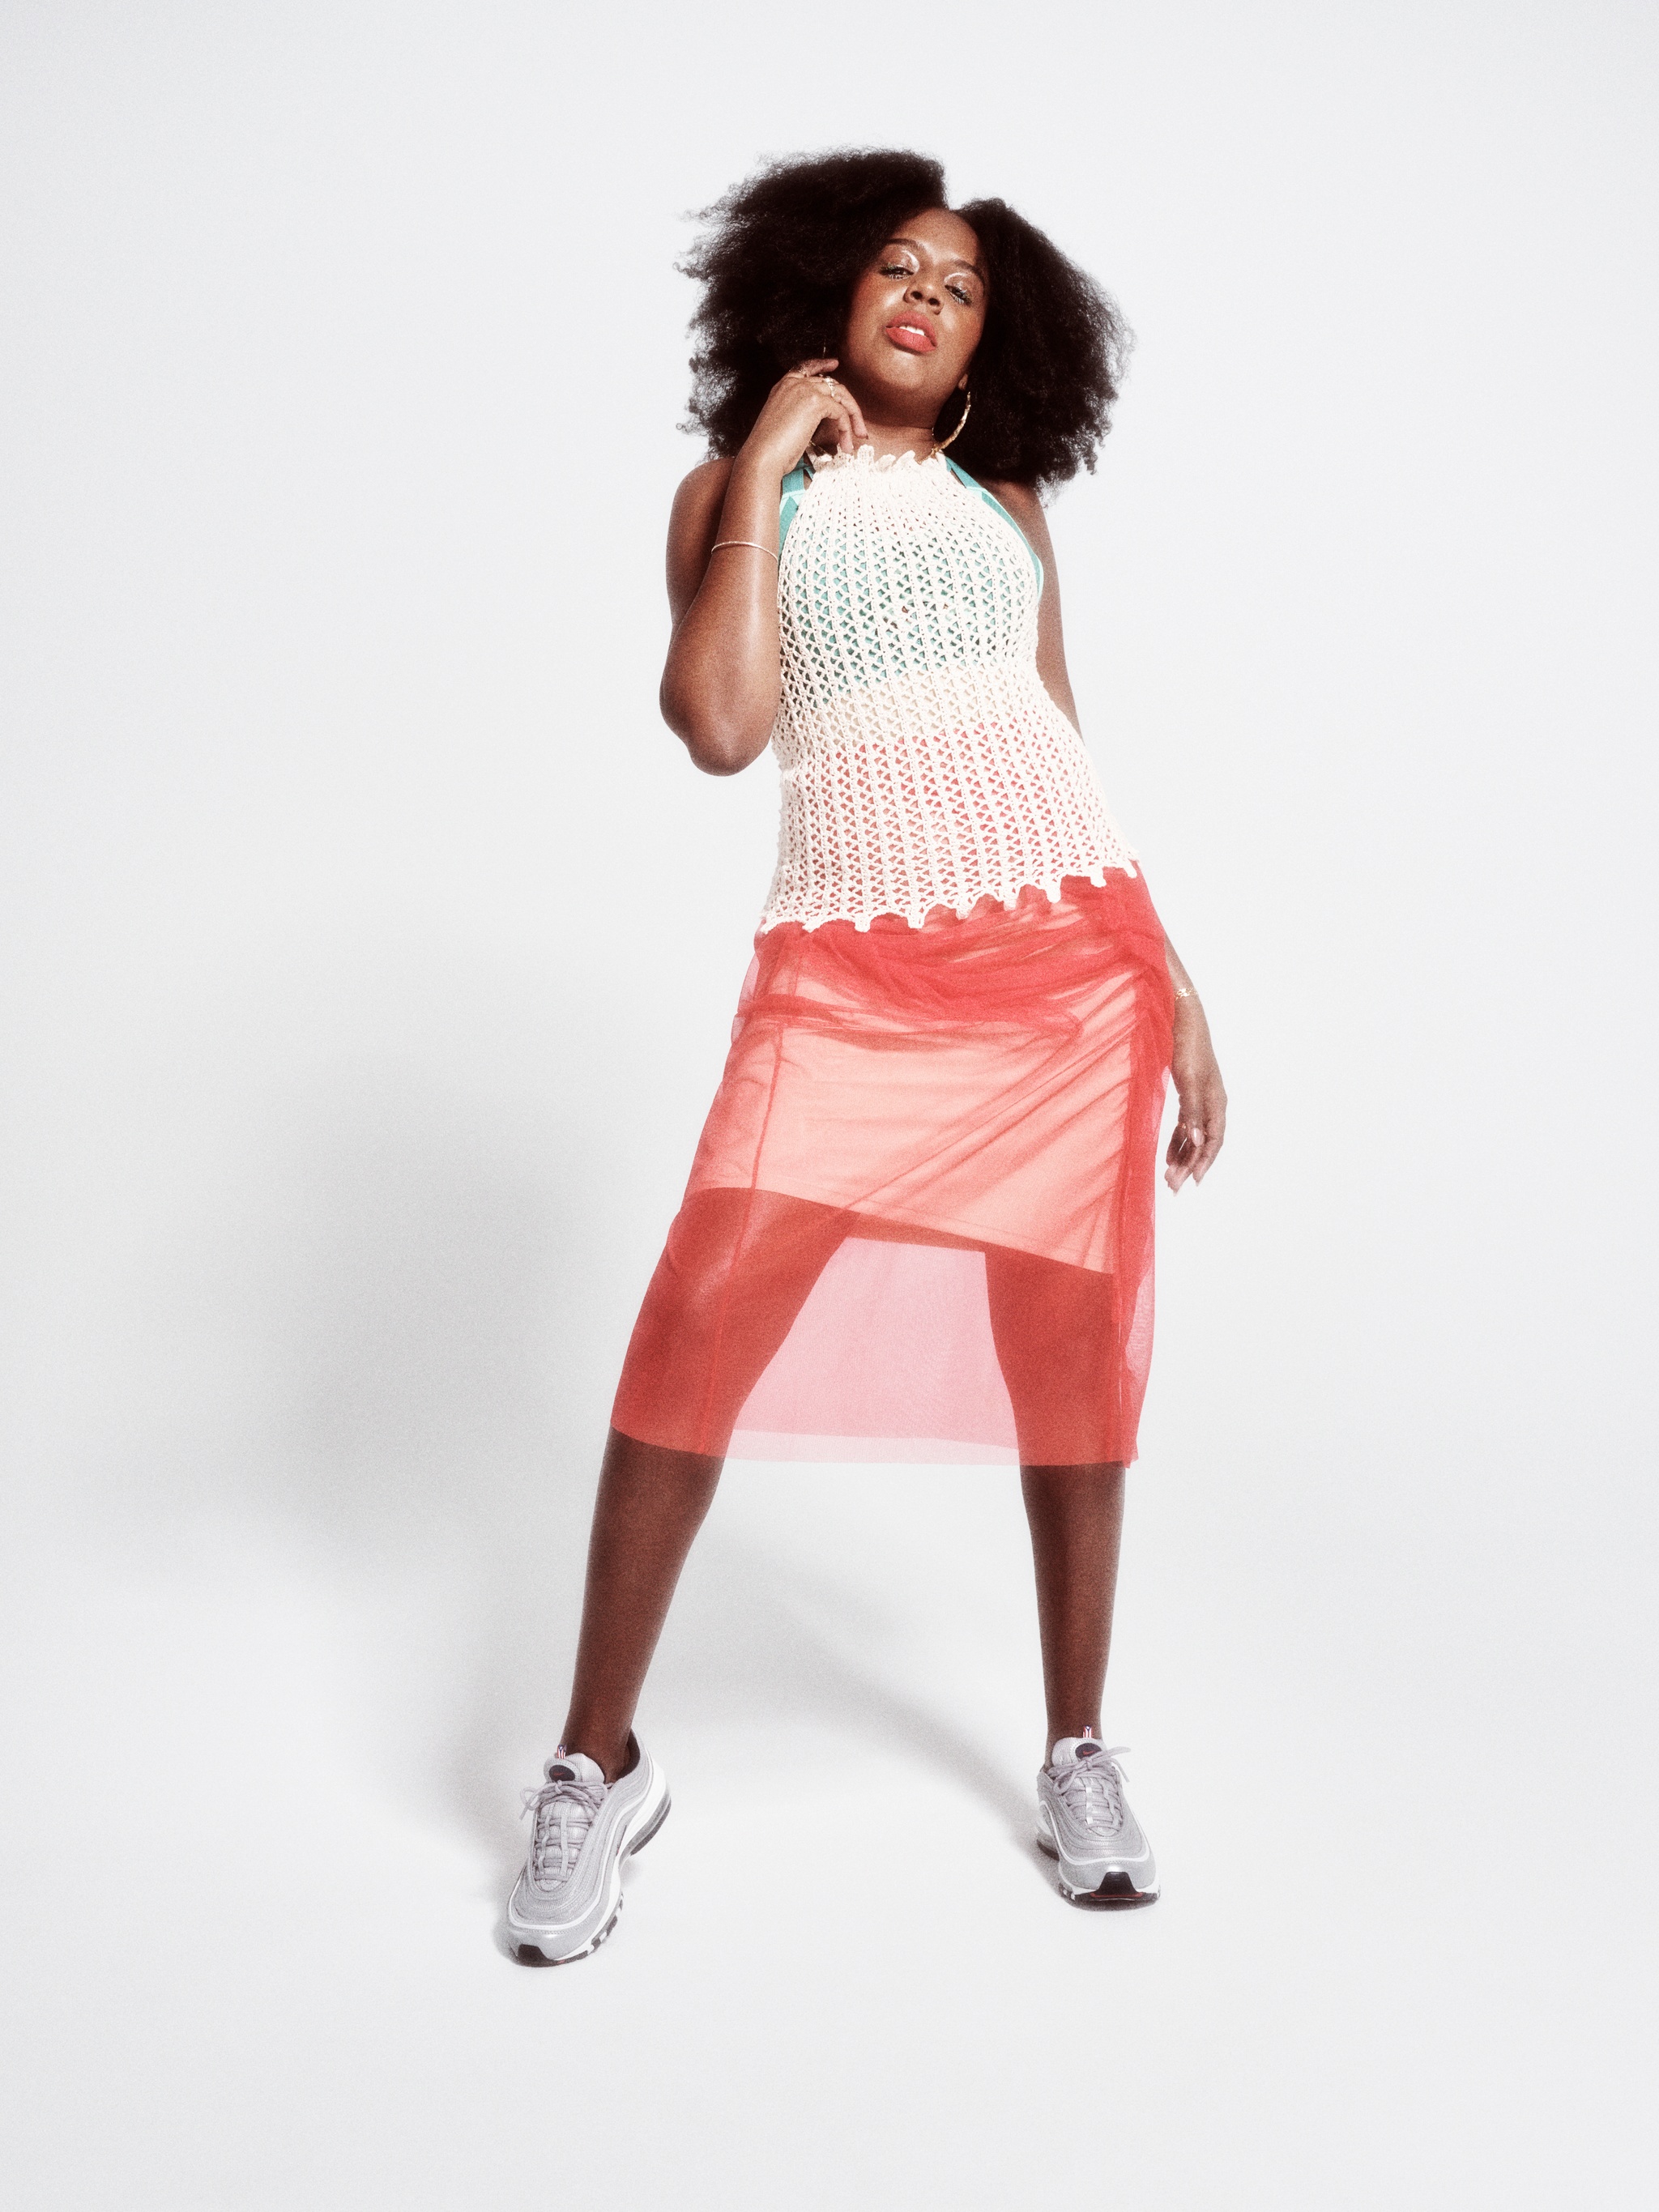 A portrait of DJ Bembona, a Black woman wearing a sheer red-orange skirt over a white dress. She wears a pair of Nike sneakers and stands against a white background.